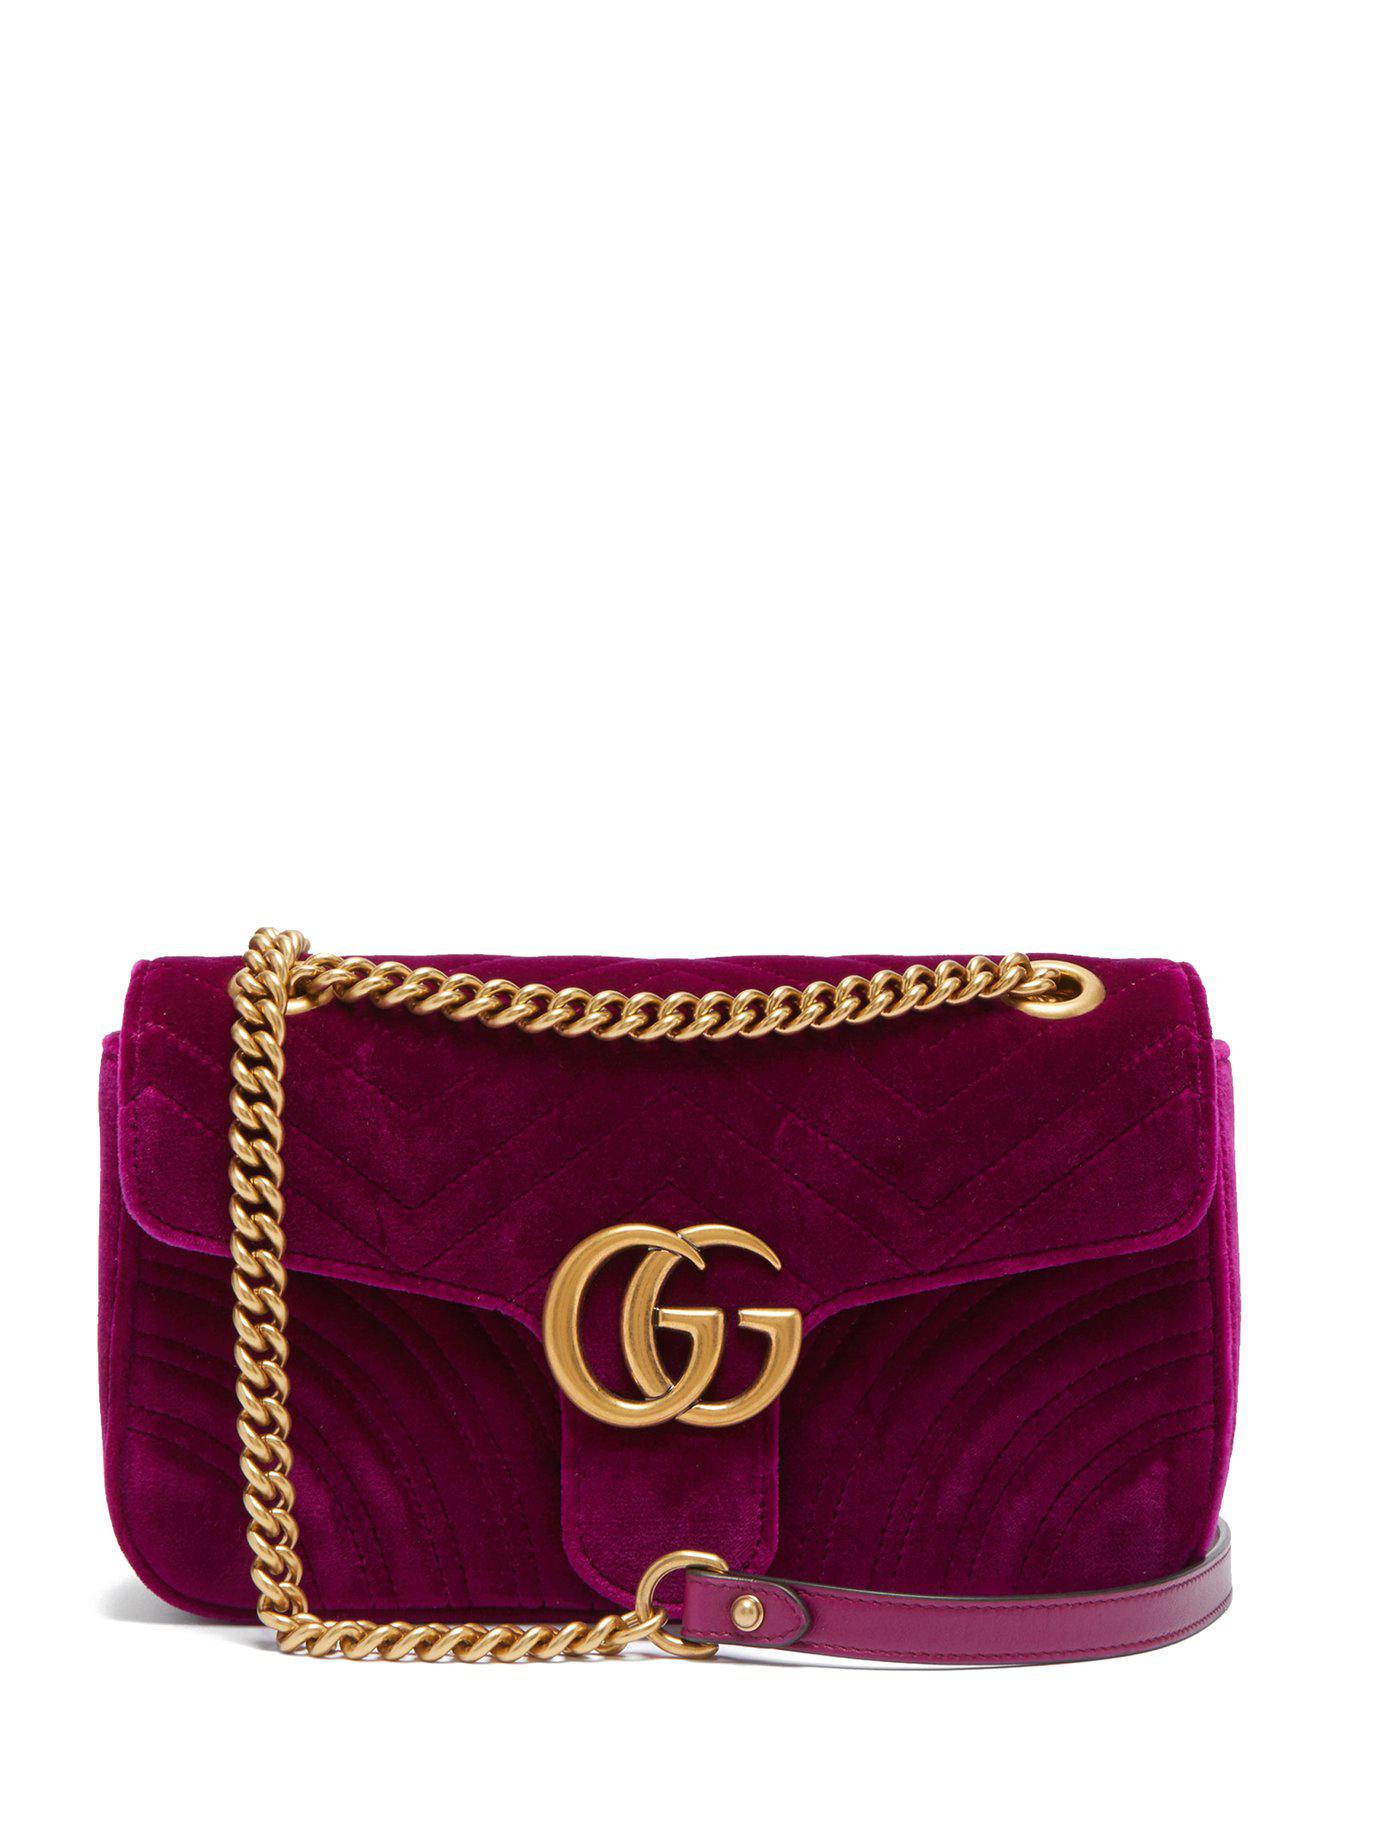 Gucci Gg Marmont Small Quilted Velvet Cross Body Bag in Purple - Lyst